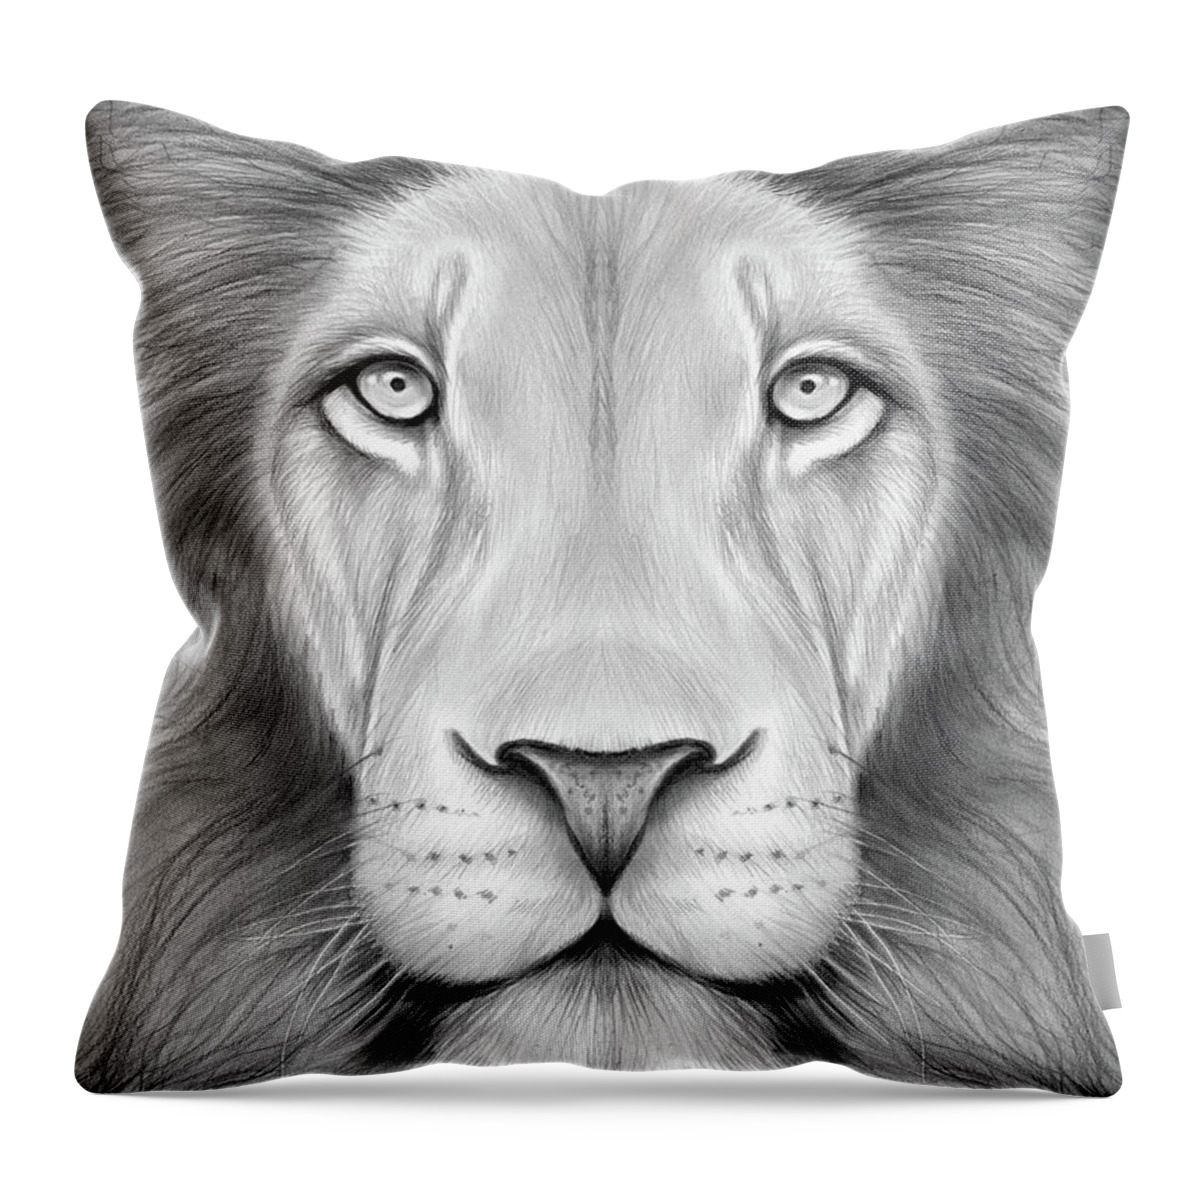 Lion Head Throw Pillow featuring the drawing Lion Head by Greg Joens